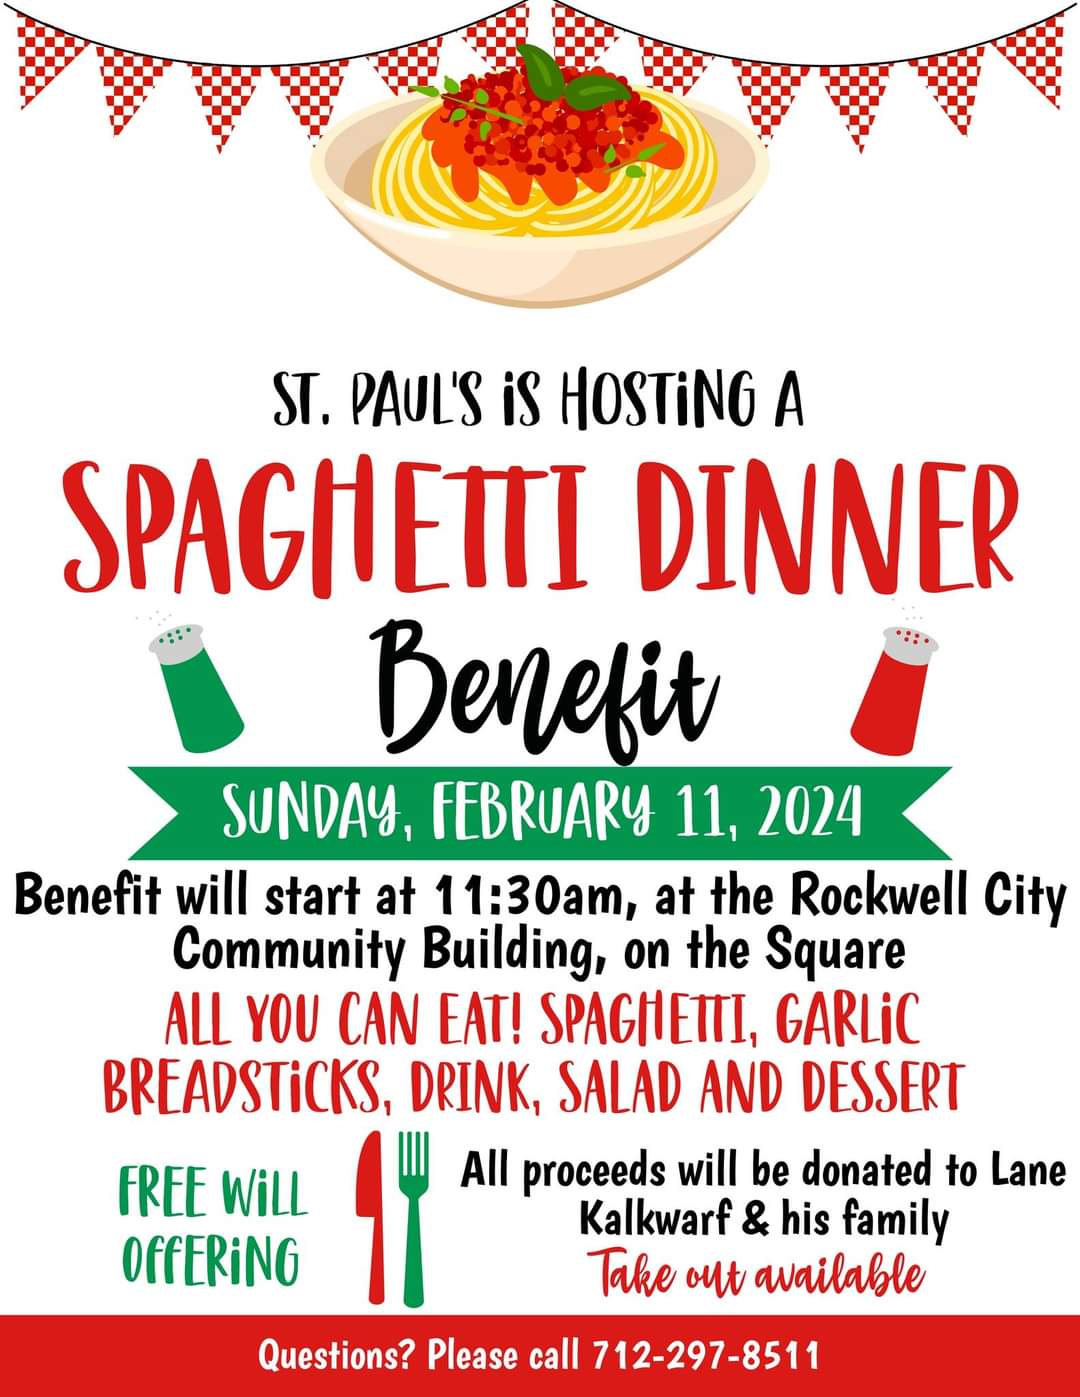 <h1 class="tribe-events-single-event-title">ST. PAUL’S SPAGHETTI DINNER BENEFIT</h1>